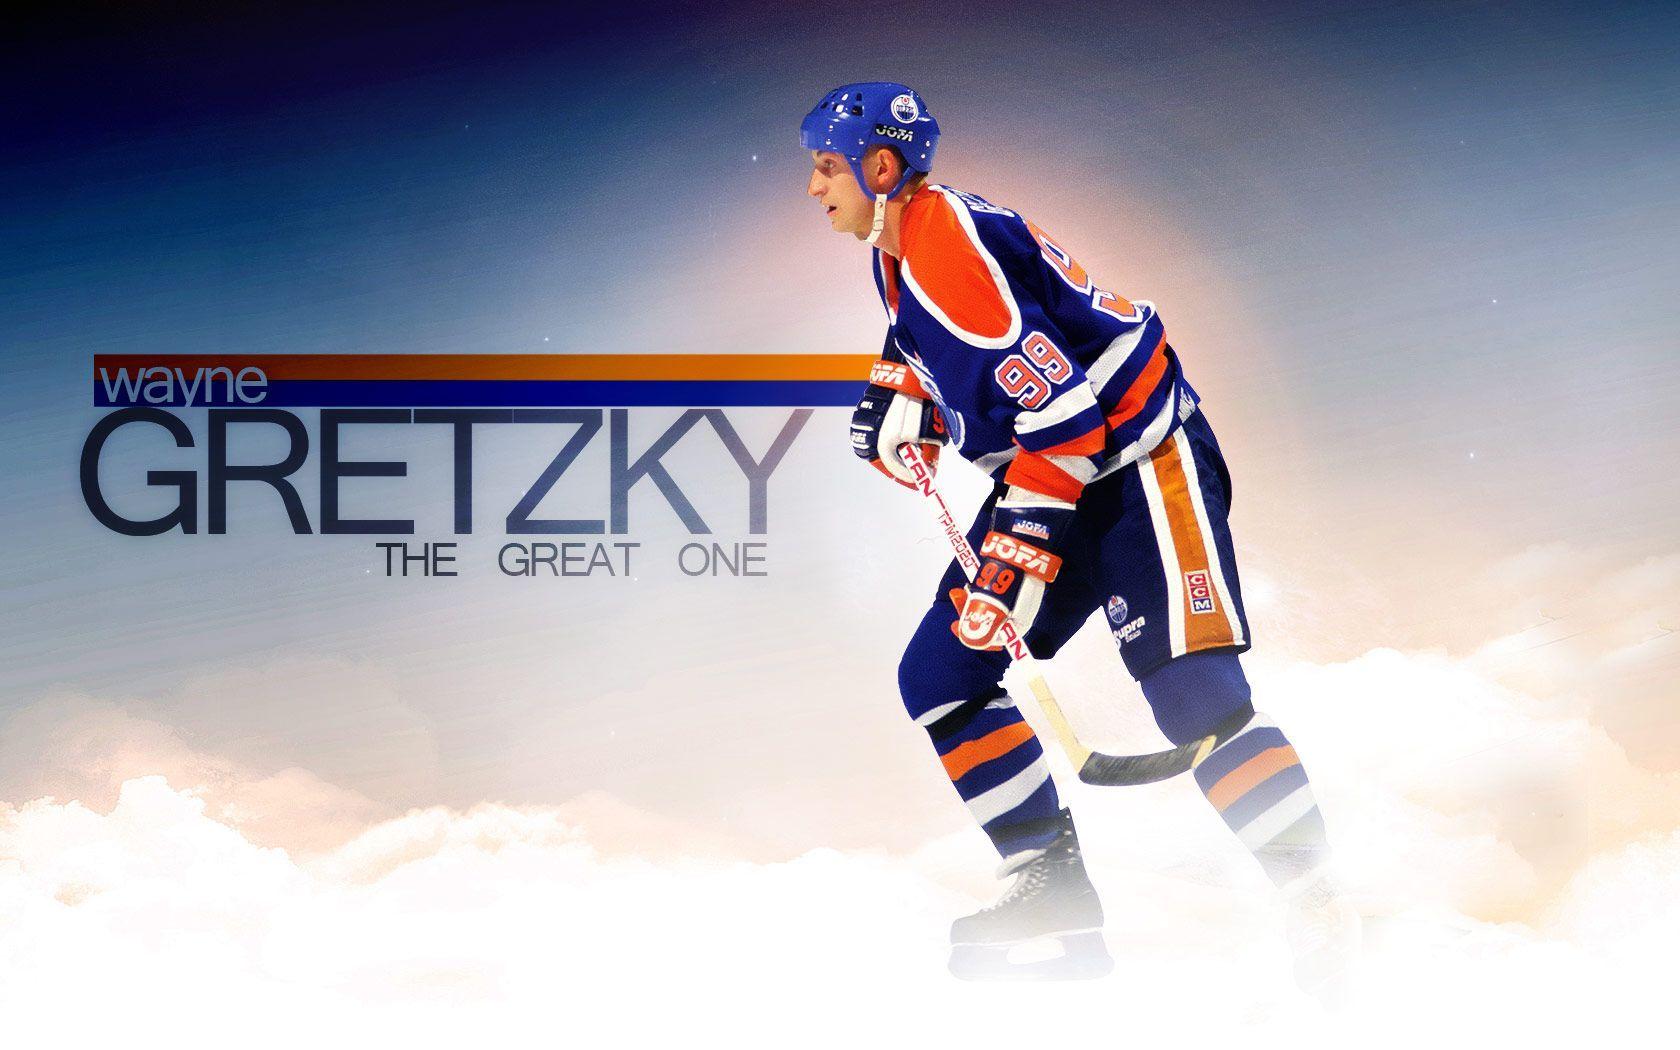 Wayne Gretzky during a hockey game wallpaper - Sport wallpapers - #53815